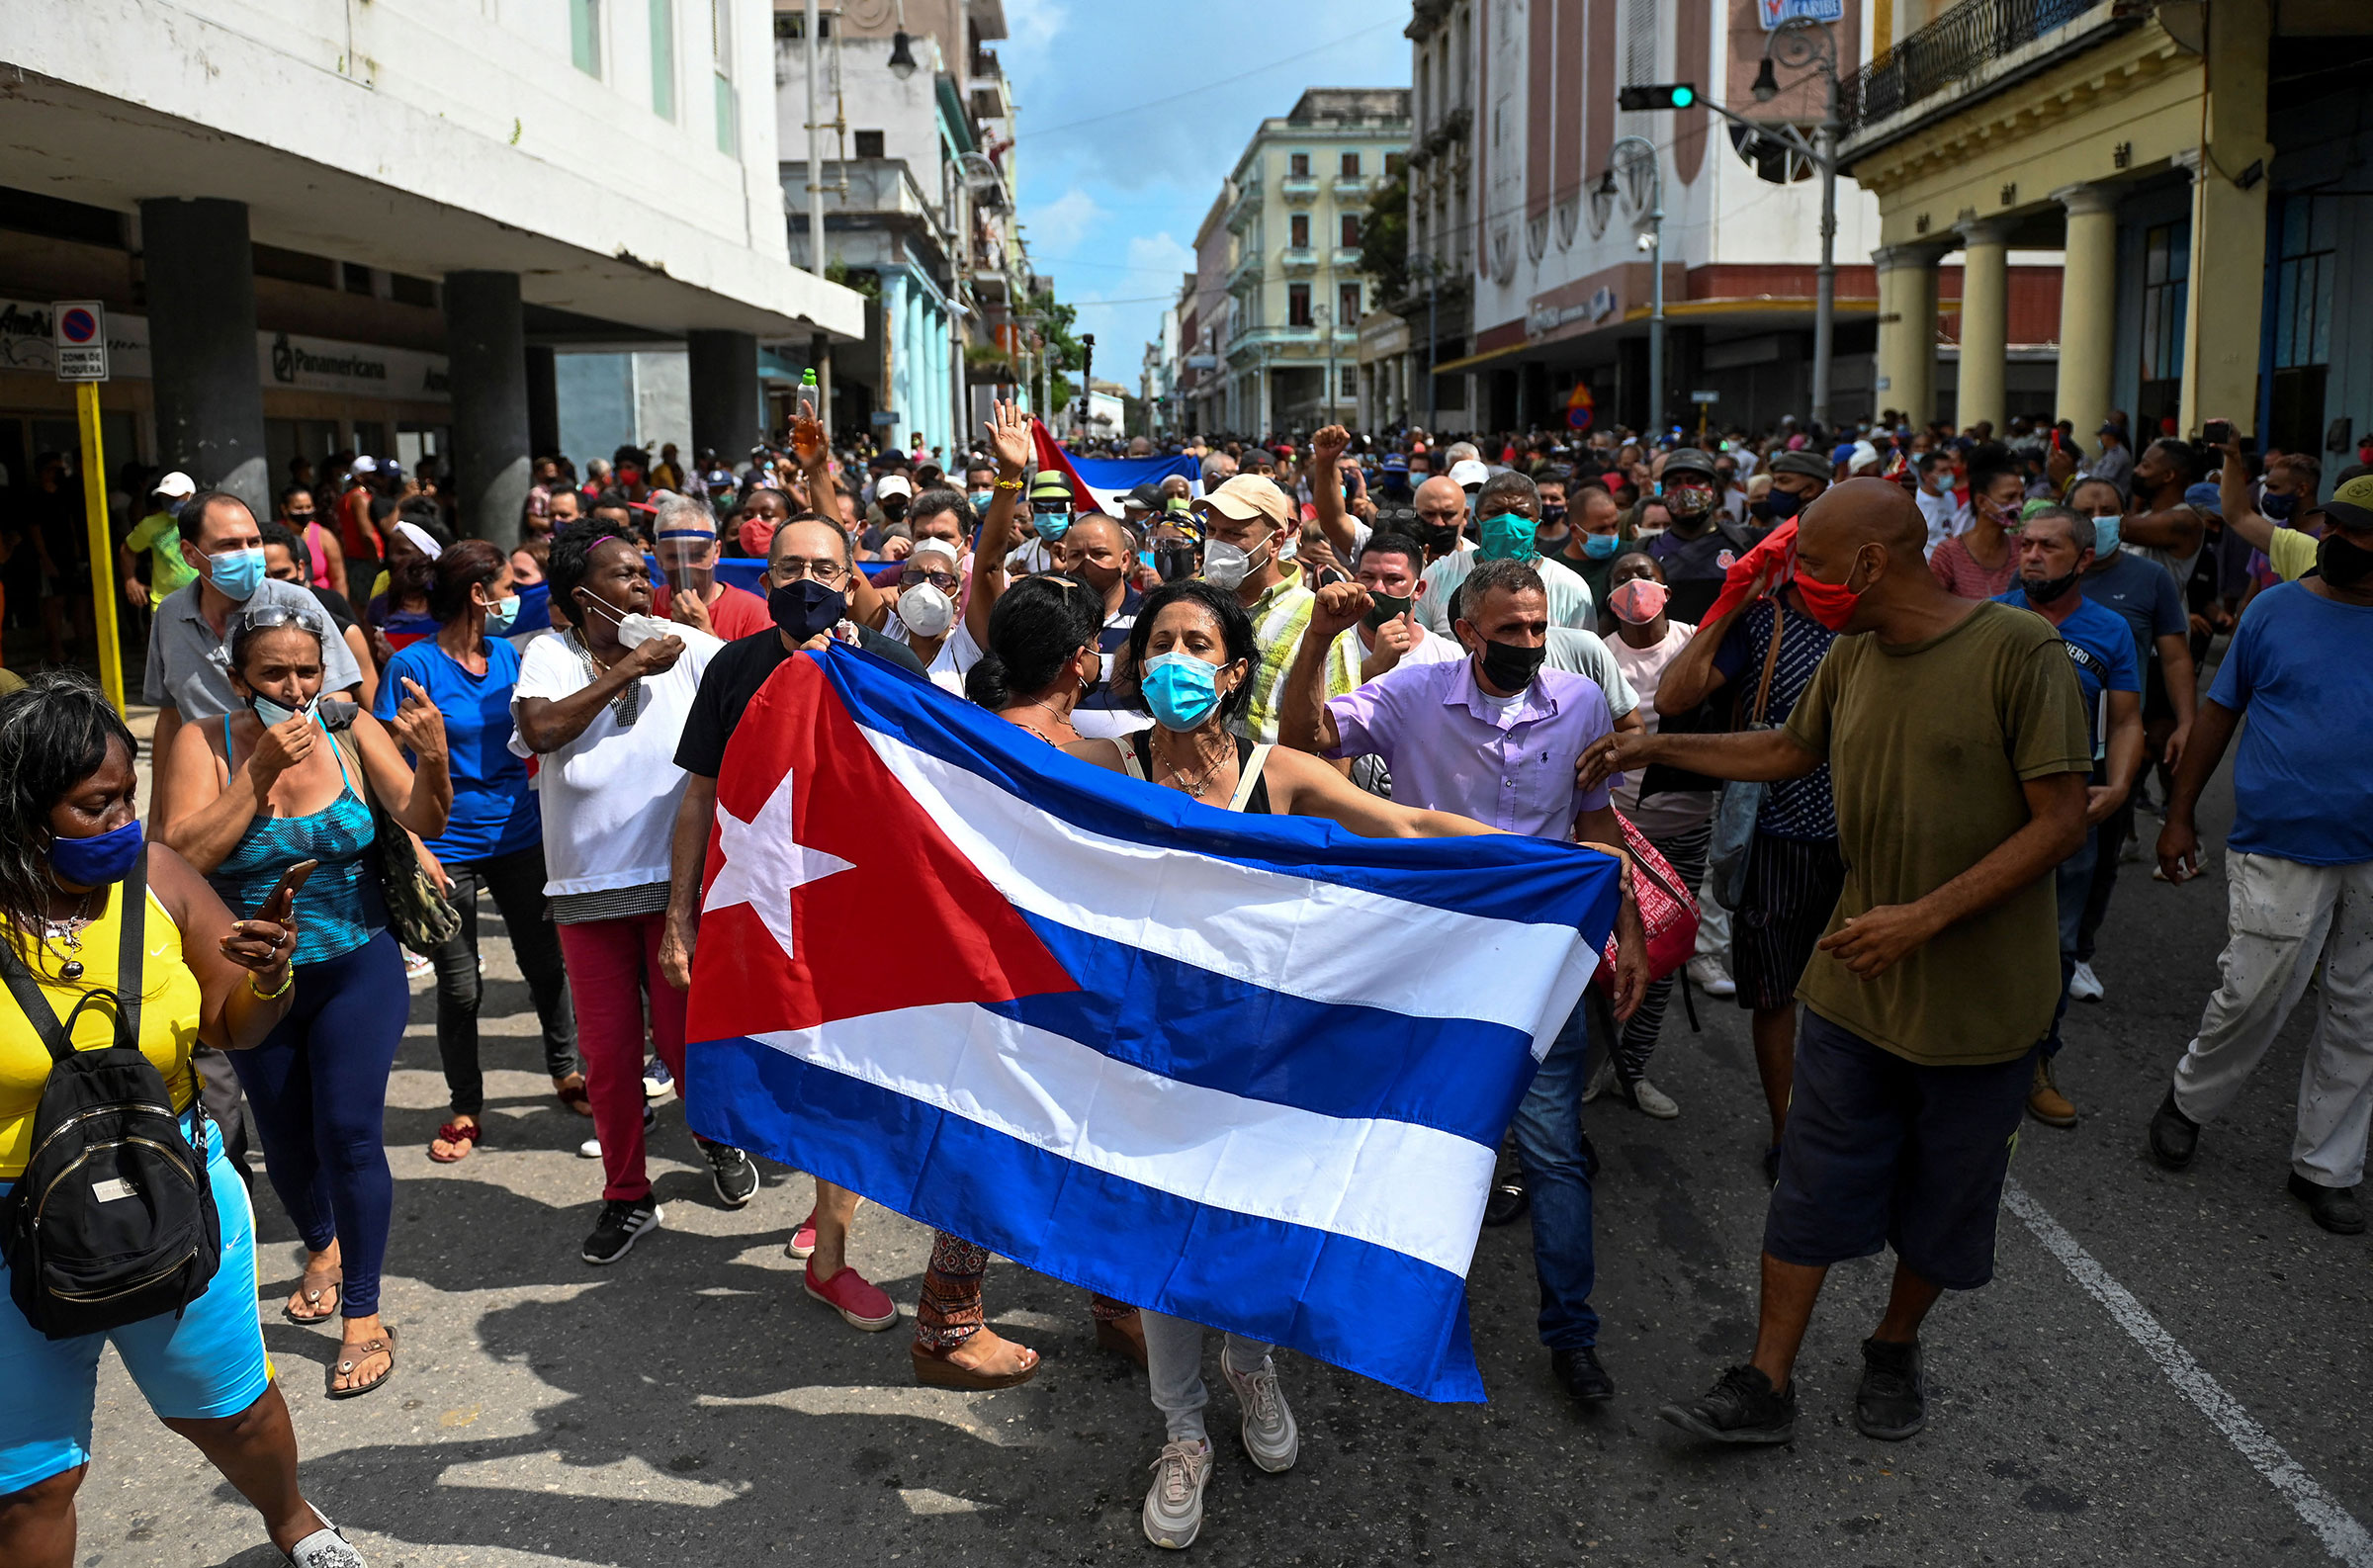 People take part in a demonstration to support the government of the Cuban President Miguel Diaz-Canel in Havana, on July 11, 2021. - Thousands of Cubans took part in rare protests Sunday against the communist government, marching through a town chanting "Down with the dictatorship" and "We want liberty." (Yamil Lage—AFP/Getty Images)